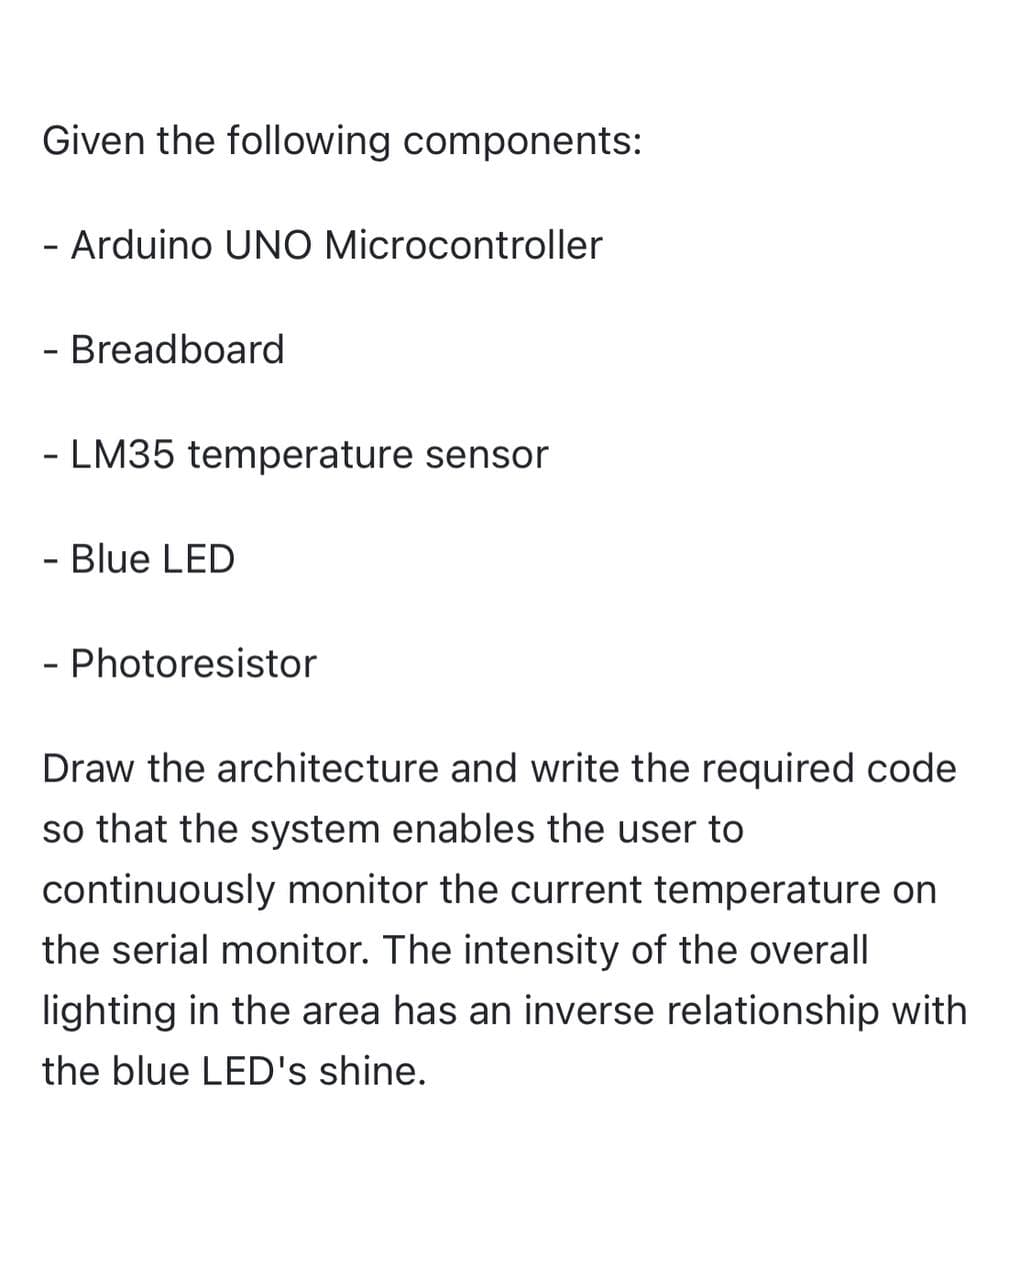 Given the following components:
- Arduino UNO Microcontroller
- Breadboard
- LM35 temperature sensor
- Blue LED
- Photoresistor
Draw the architecture and write the required code
so that the system enables the user to
continuously monitor the current temperature on
the serial monitor. The intensity of the overall
lighting in the area has an inverse relationship with
the blue LED's shine.